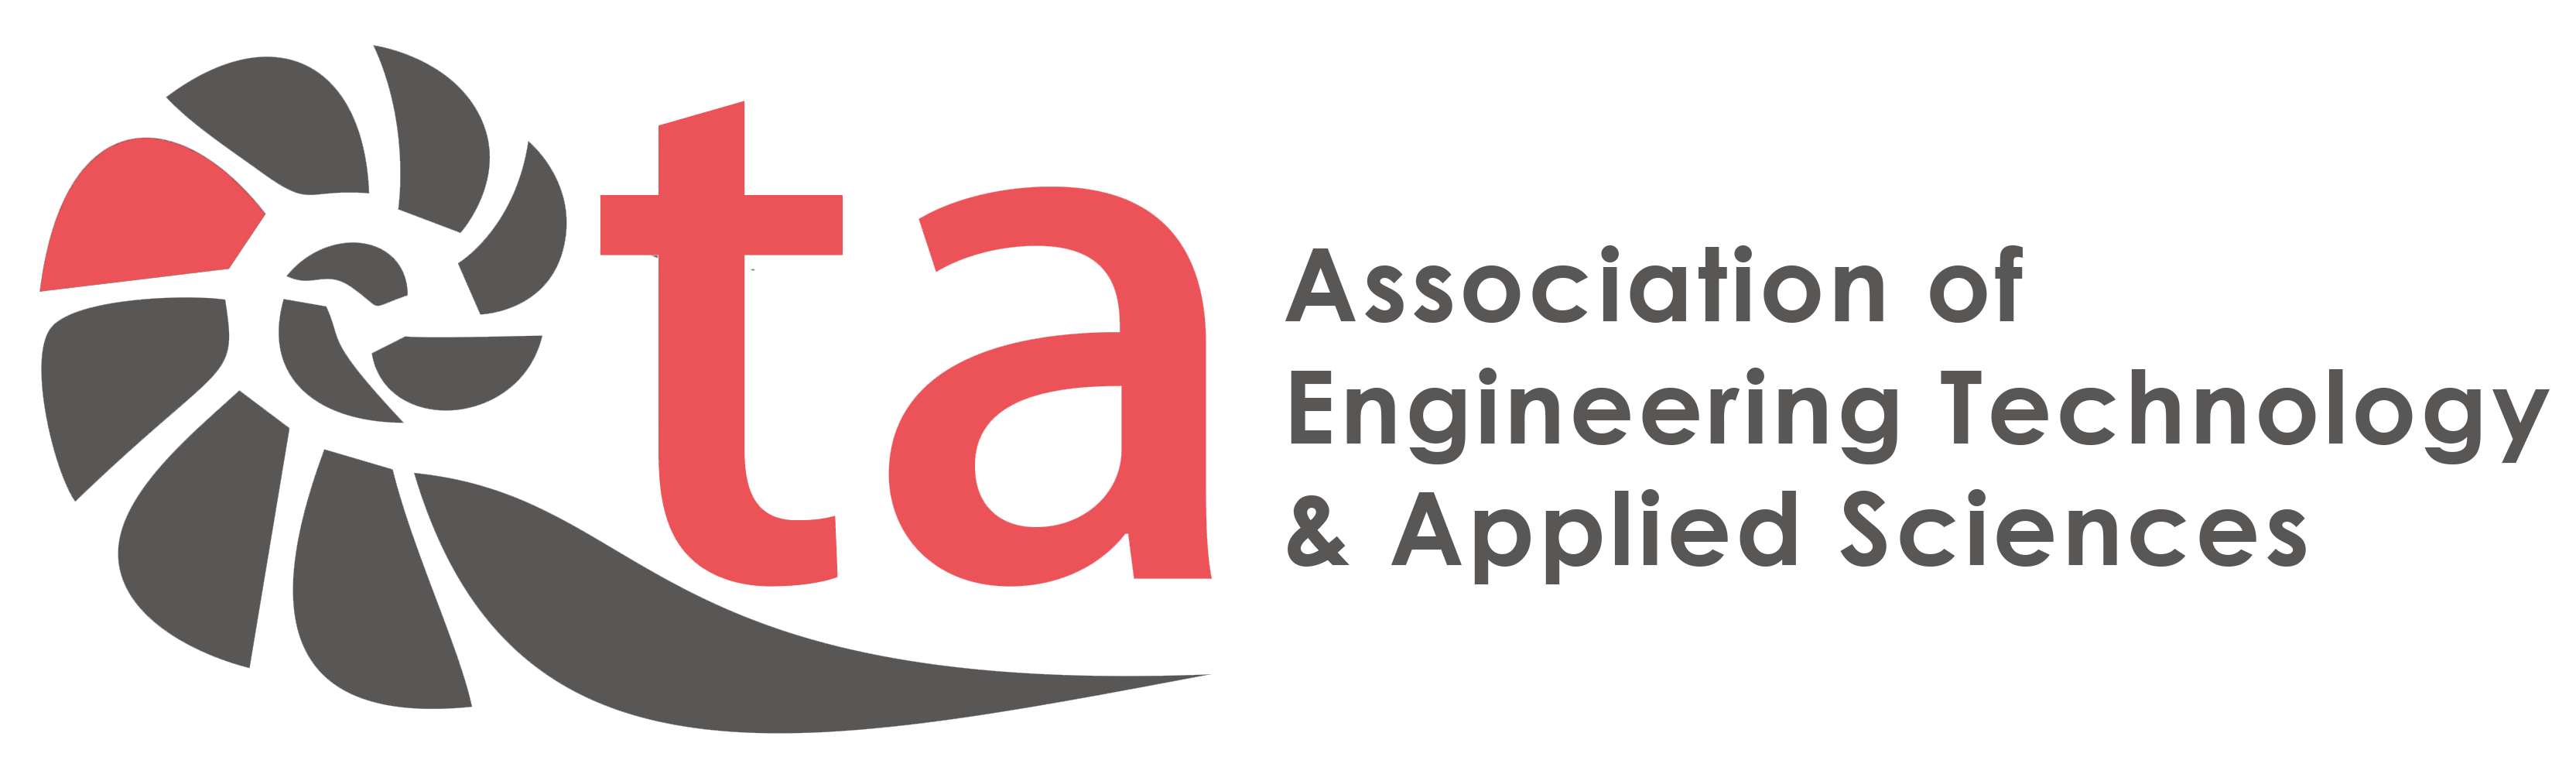 AETA 2nd International Conference on Future Trends in Engineering, Robotics and Drones, Information Technology & Applied Sciences ERIA